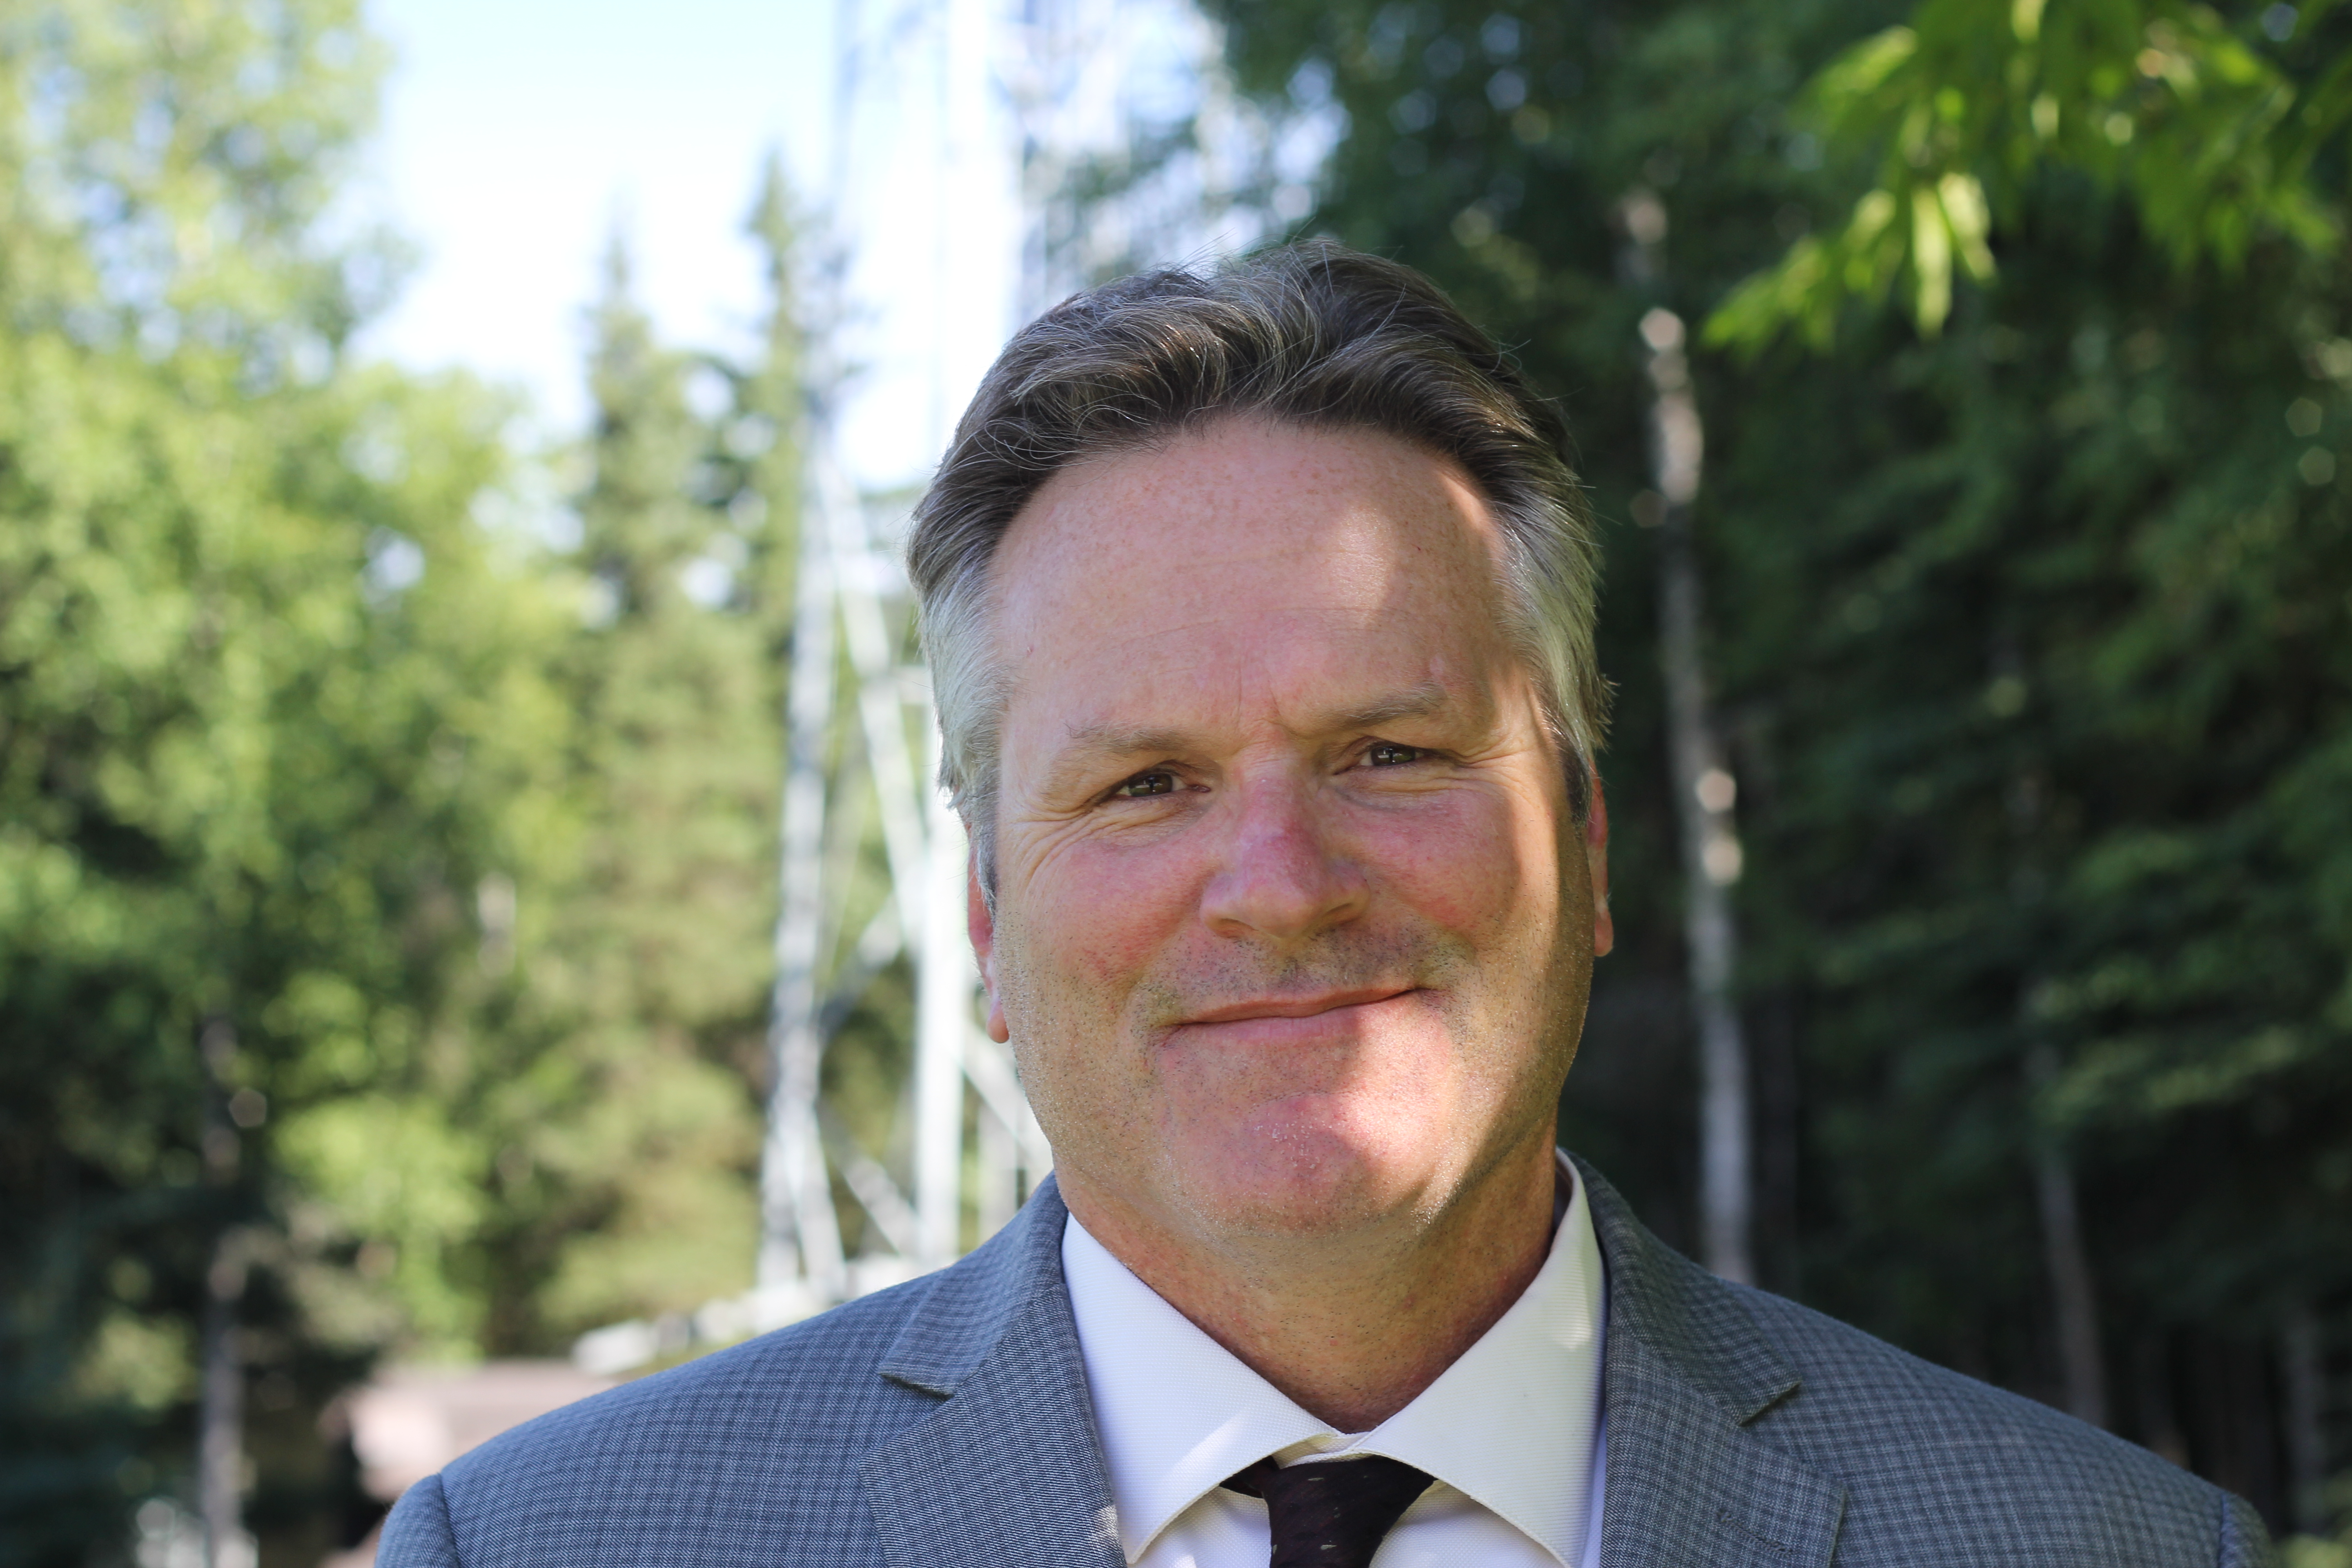 Former Wasilla state Sen. Mike Dunleavy is running to be the Republican nominee for Alaska's governor. (Photo by Wesley Early/Alaska Public Media)